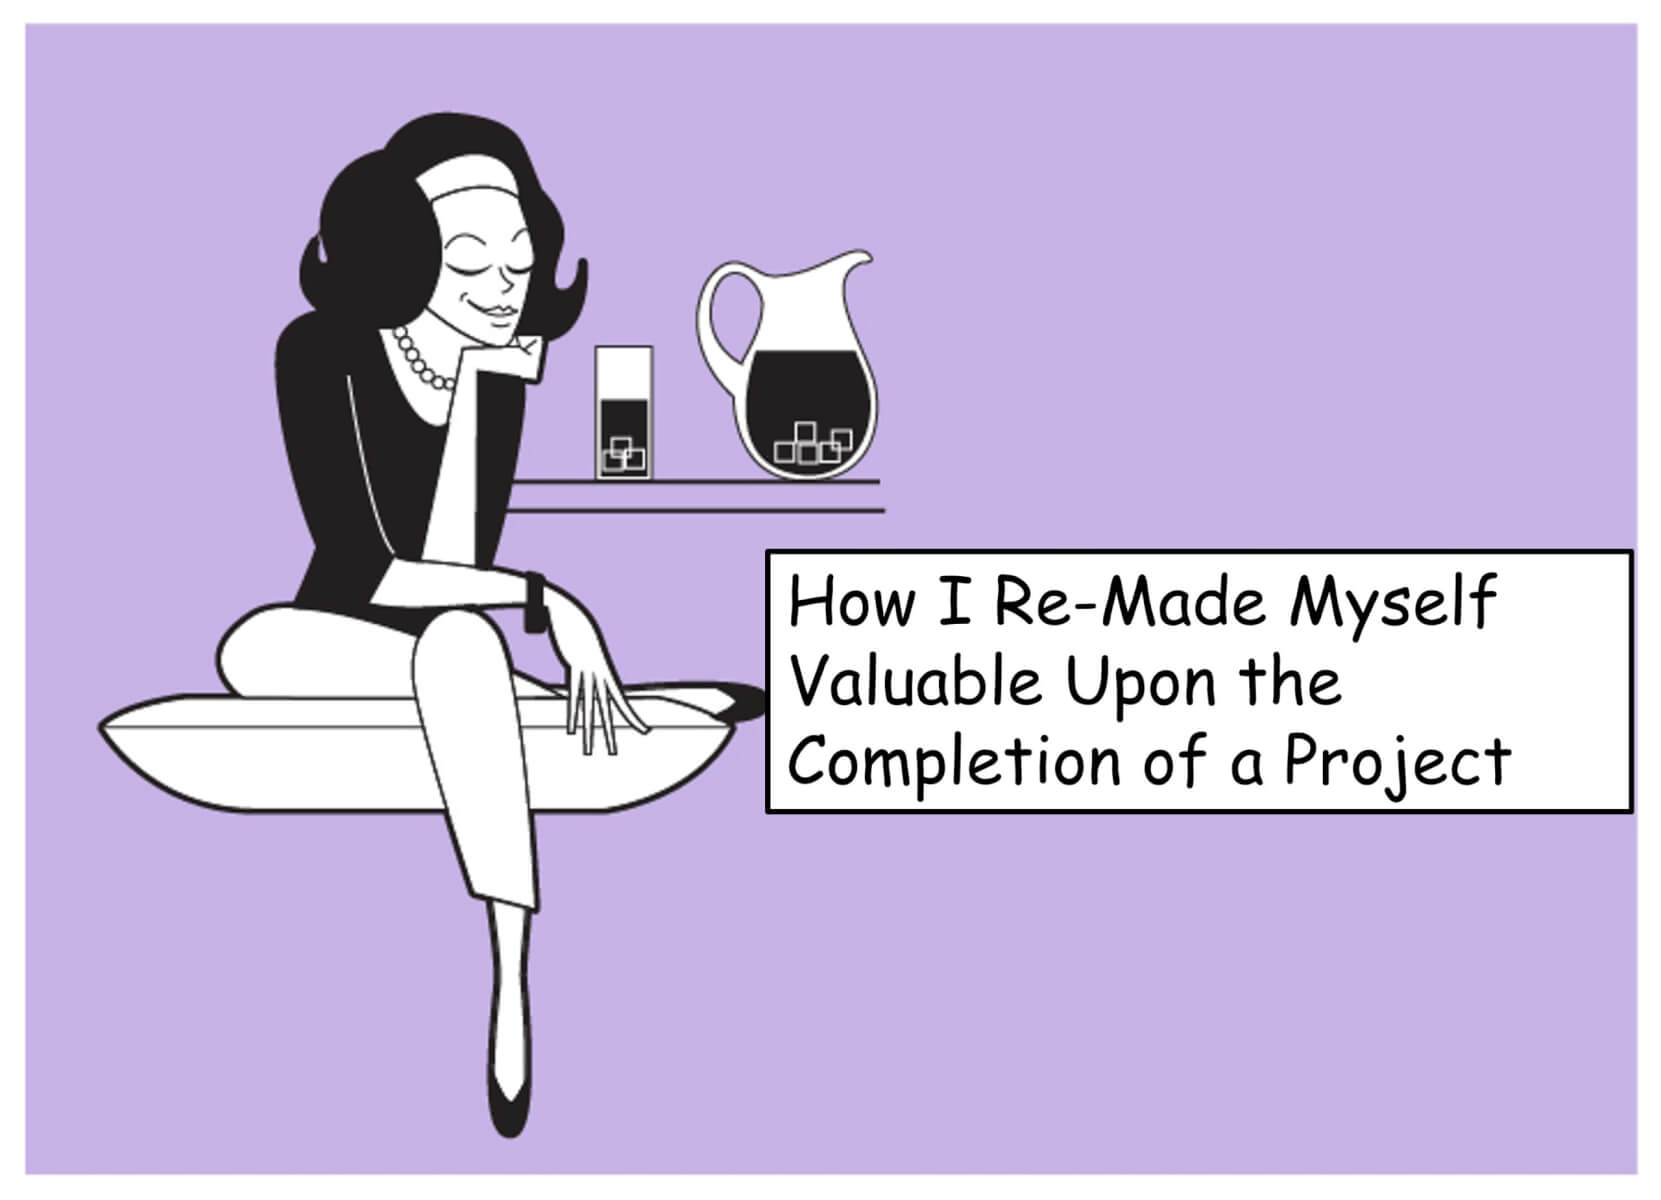 How I Re-Made Myself Valuable Upon the Completion of a Project